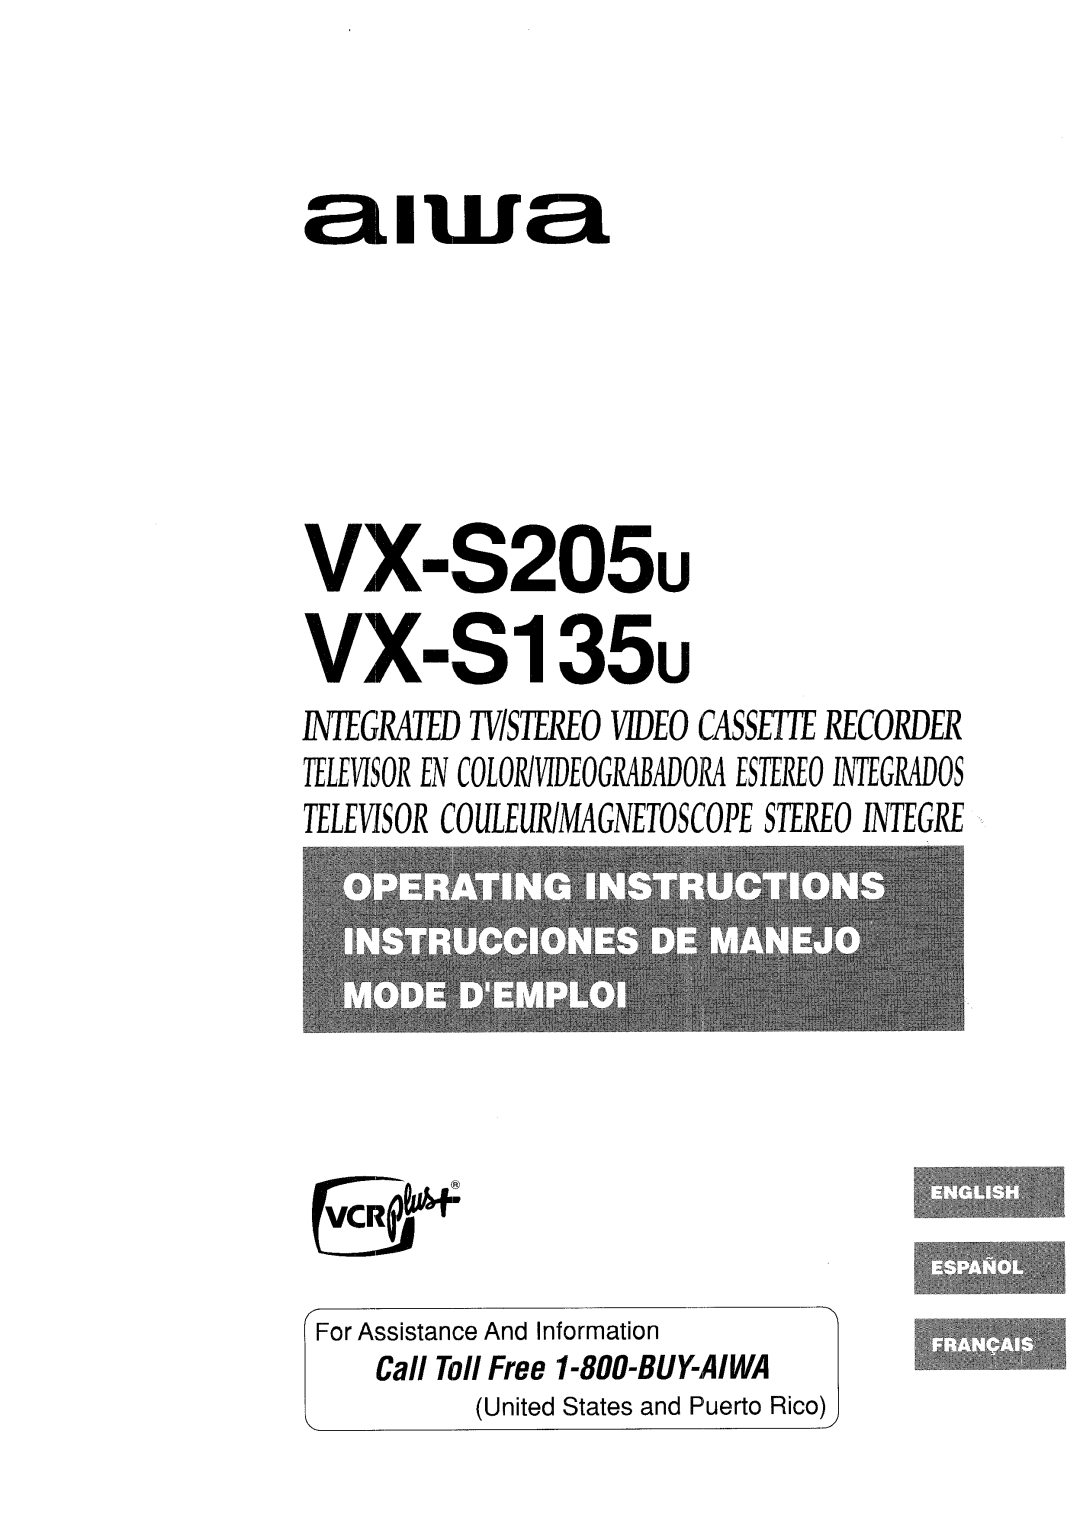 Aiwa VX-S205U manual Call Toll Free I-800-BUYWWA, For Assistance And Information, United States and Puerto Rico J 